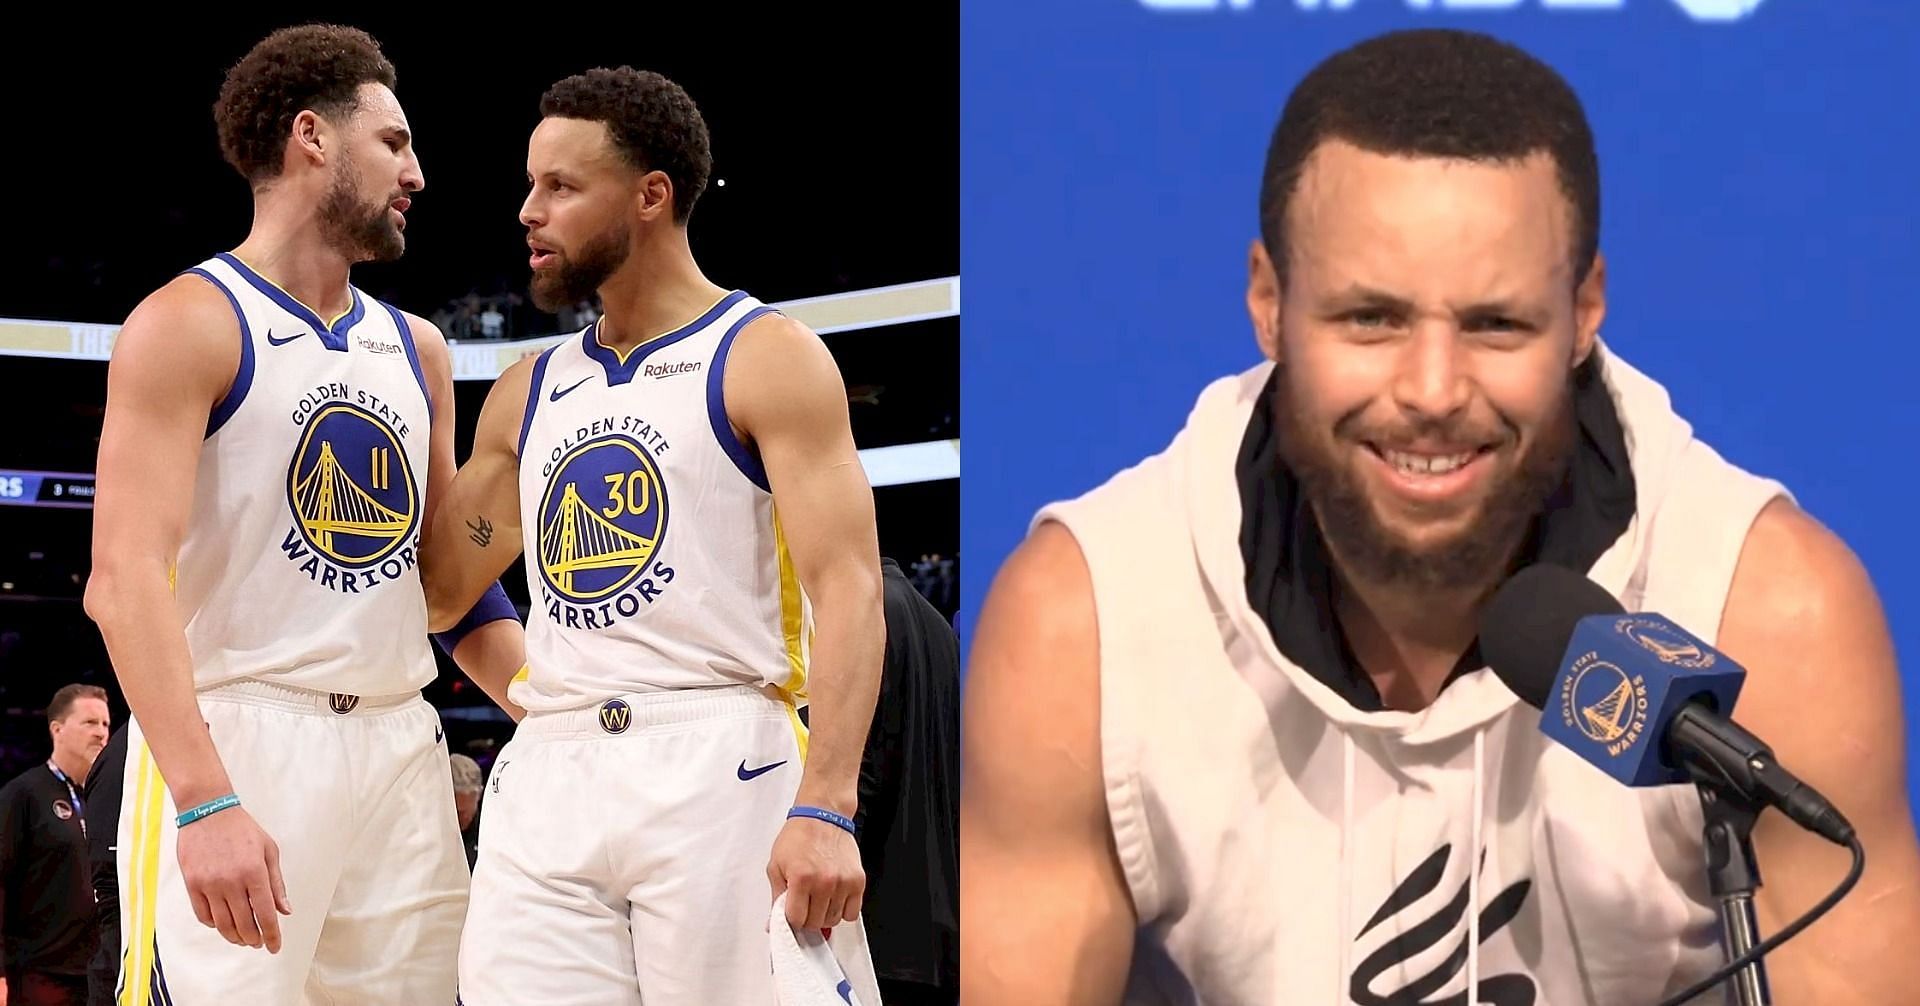 Steph Curry hilariously admits being salty over losing free-throw title to Klay Thompson